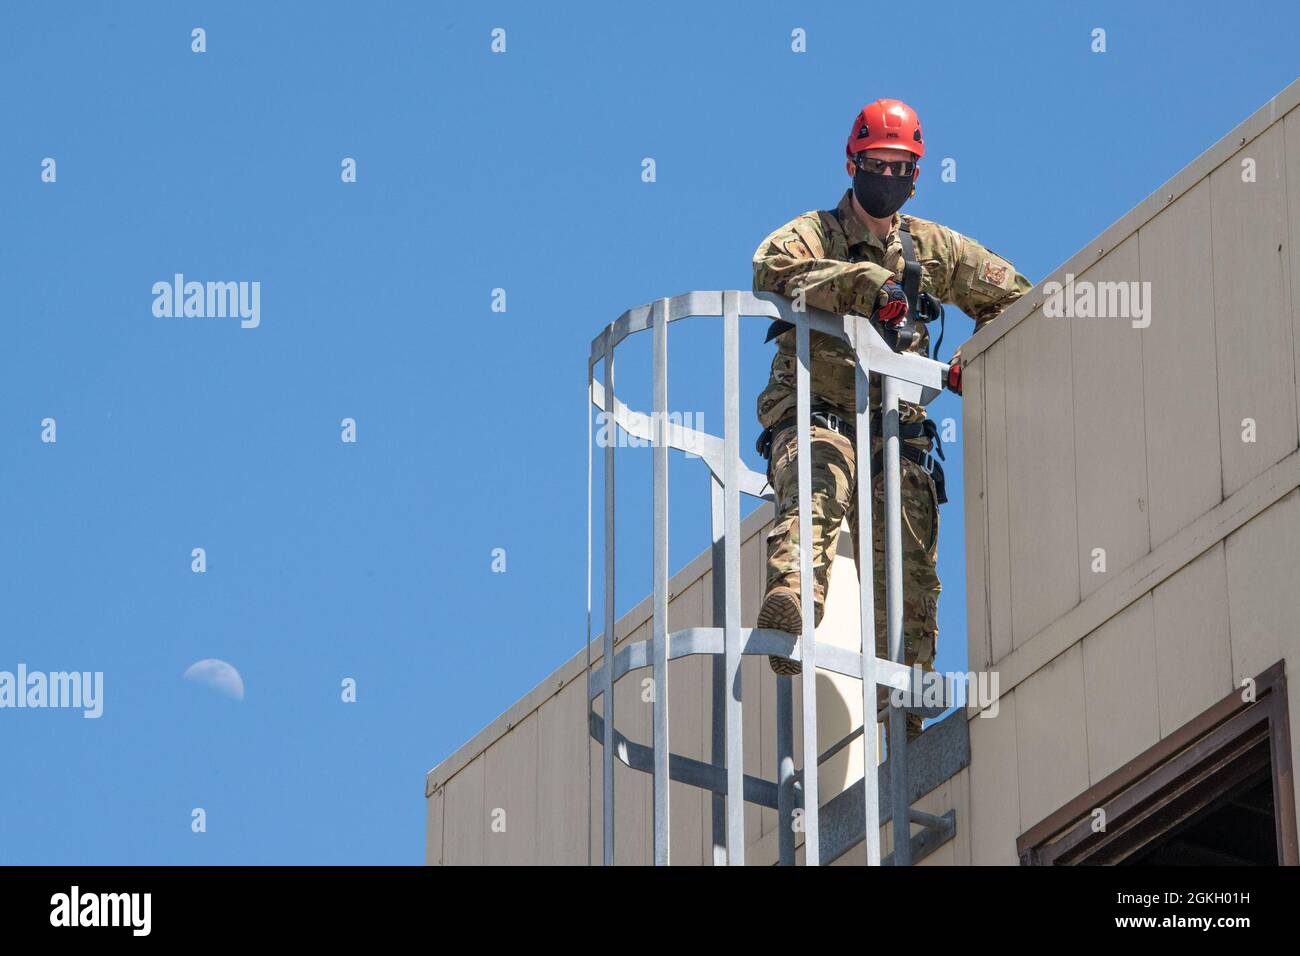 U.S. Air Force Staff. Sgt. Daniel Robinson, 60th Civil Engineer Squadron lead firefighter, climbs a ladder that leads to the roof of the structure used to train fire protection personnel April 19, 2021, at the Travis Fire and Emergency Services training facility at Travis Air Force Base, California. The training demonstration provided senior leadership with a clear picture of the technical rescue capabilities for multi-story building and confined space rescues conducted by Travis AFB emergency response personnel. Stock Photo